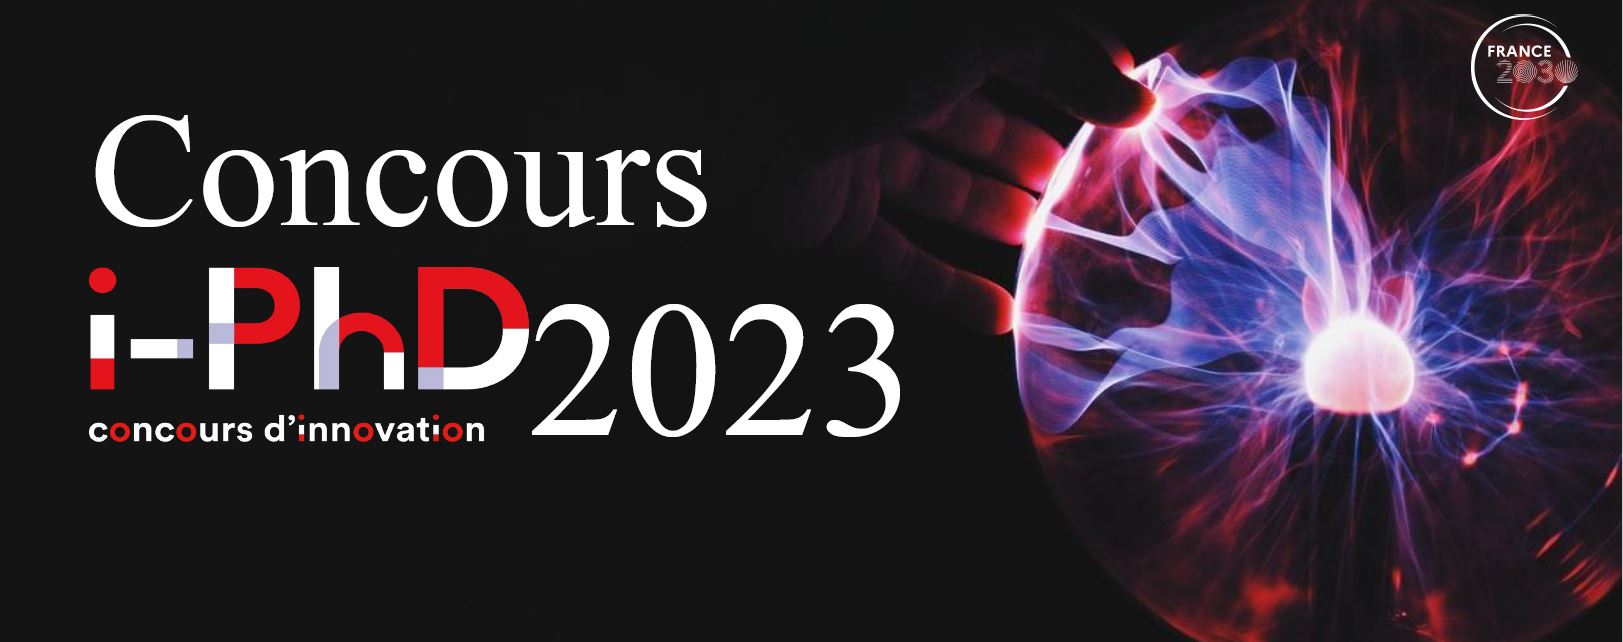 Concours I-PhD 2023